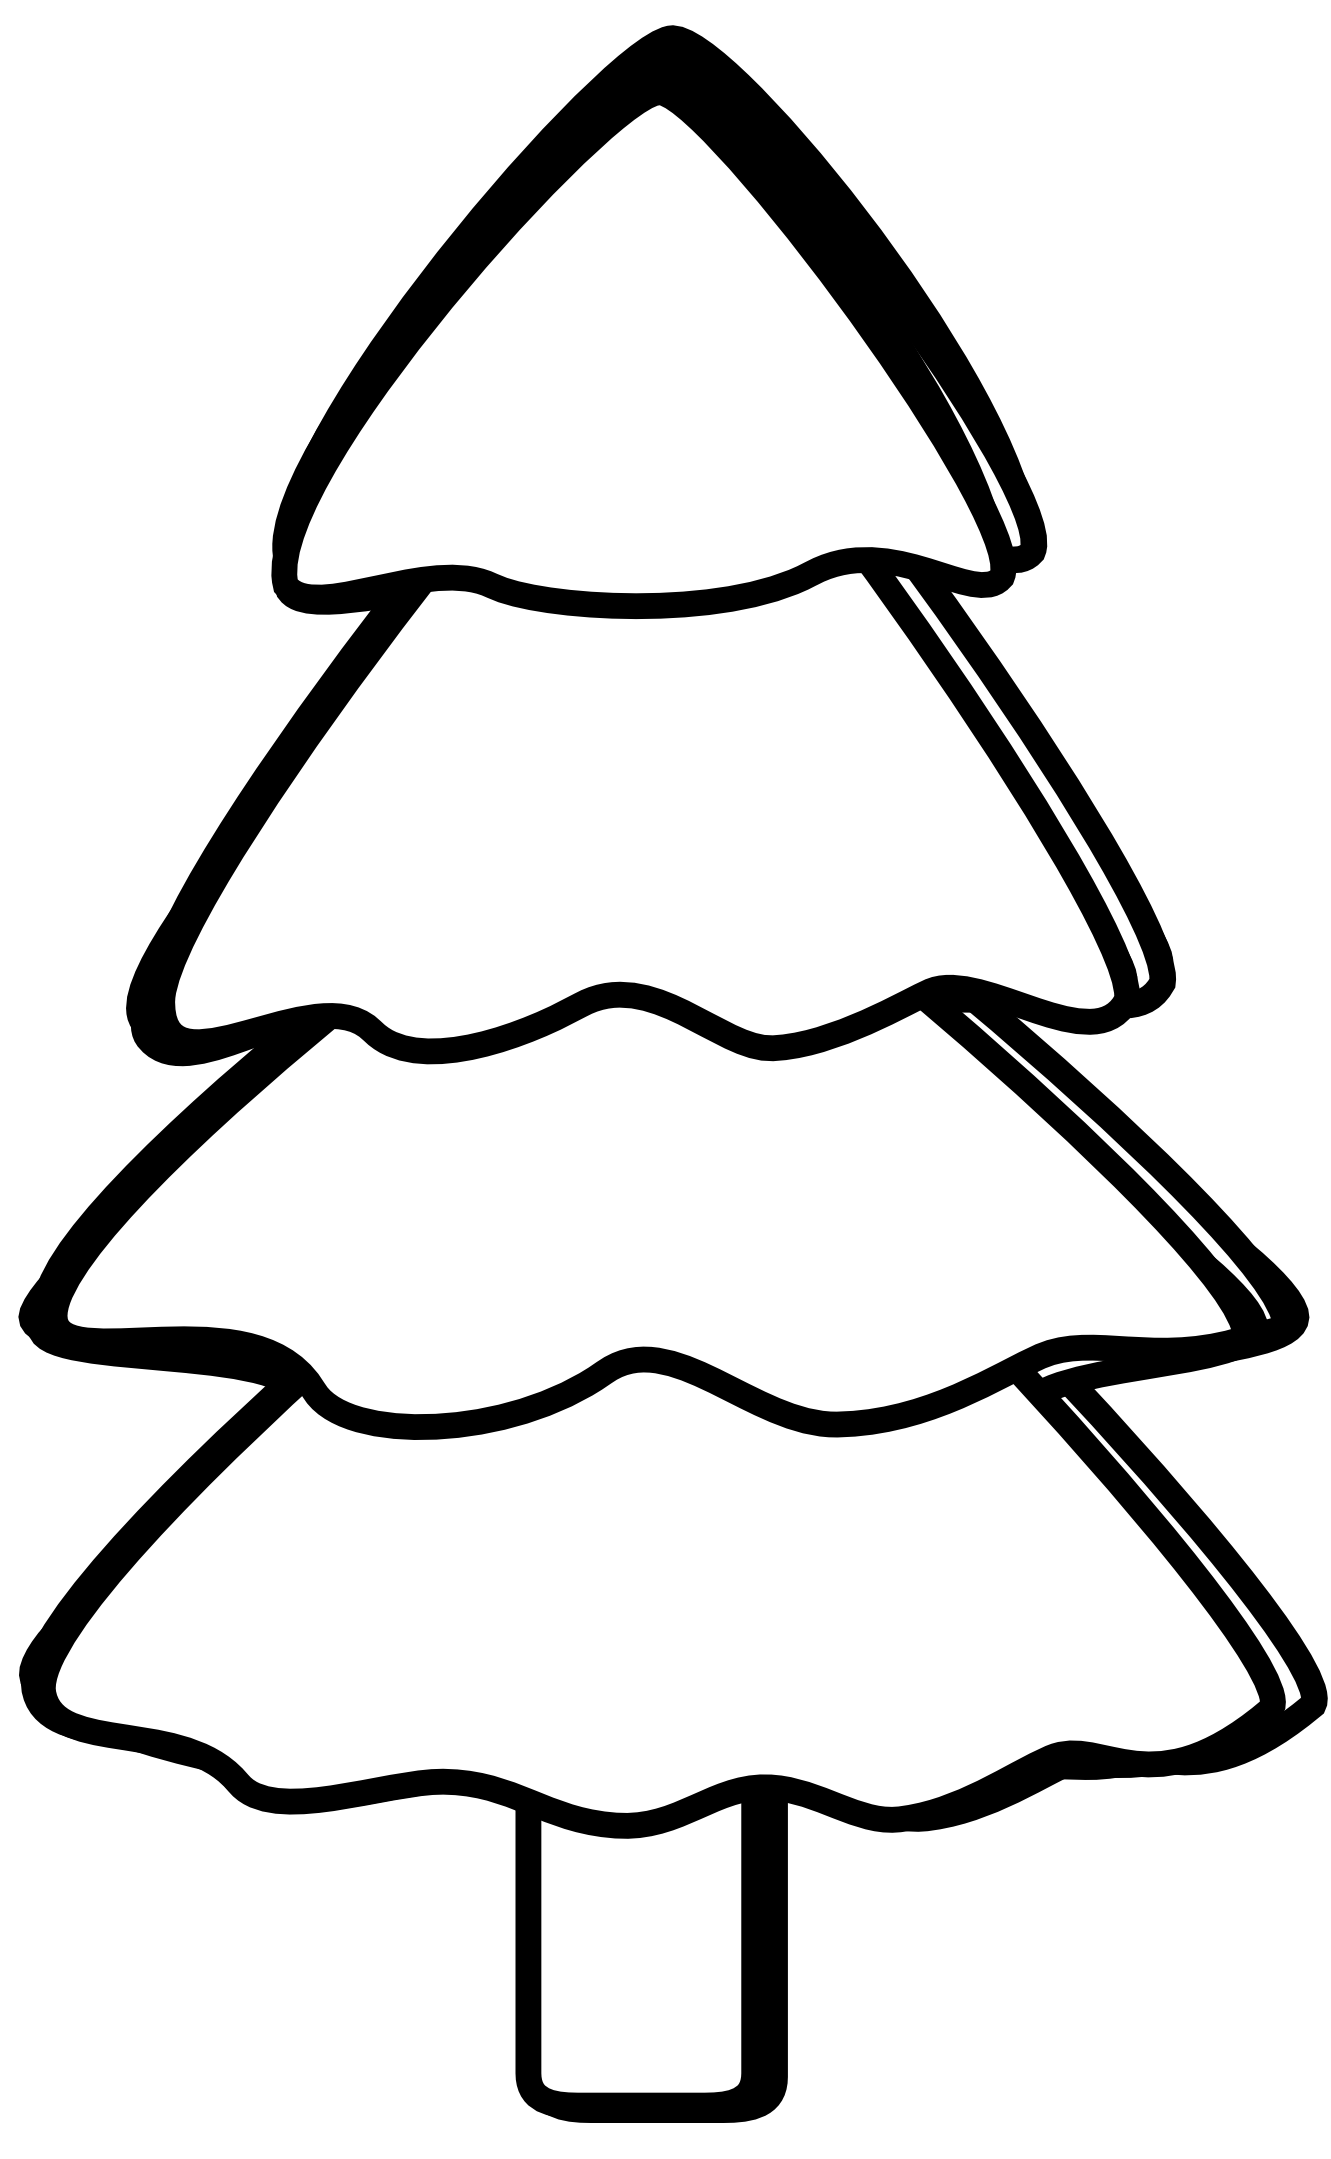 Tree Clip Art Black And White - Clipart library